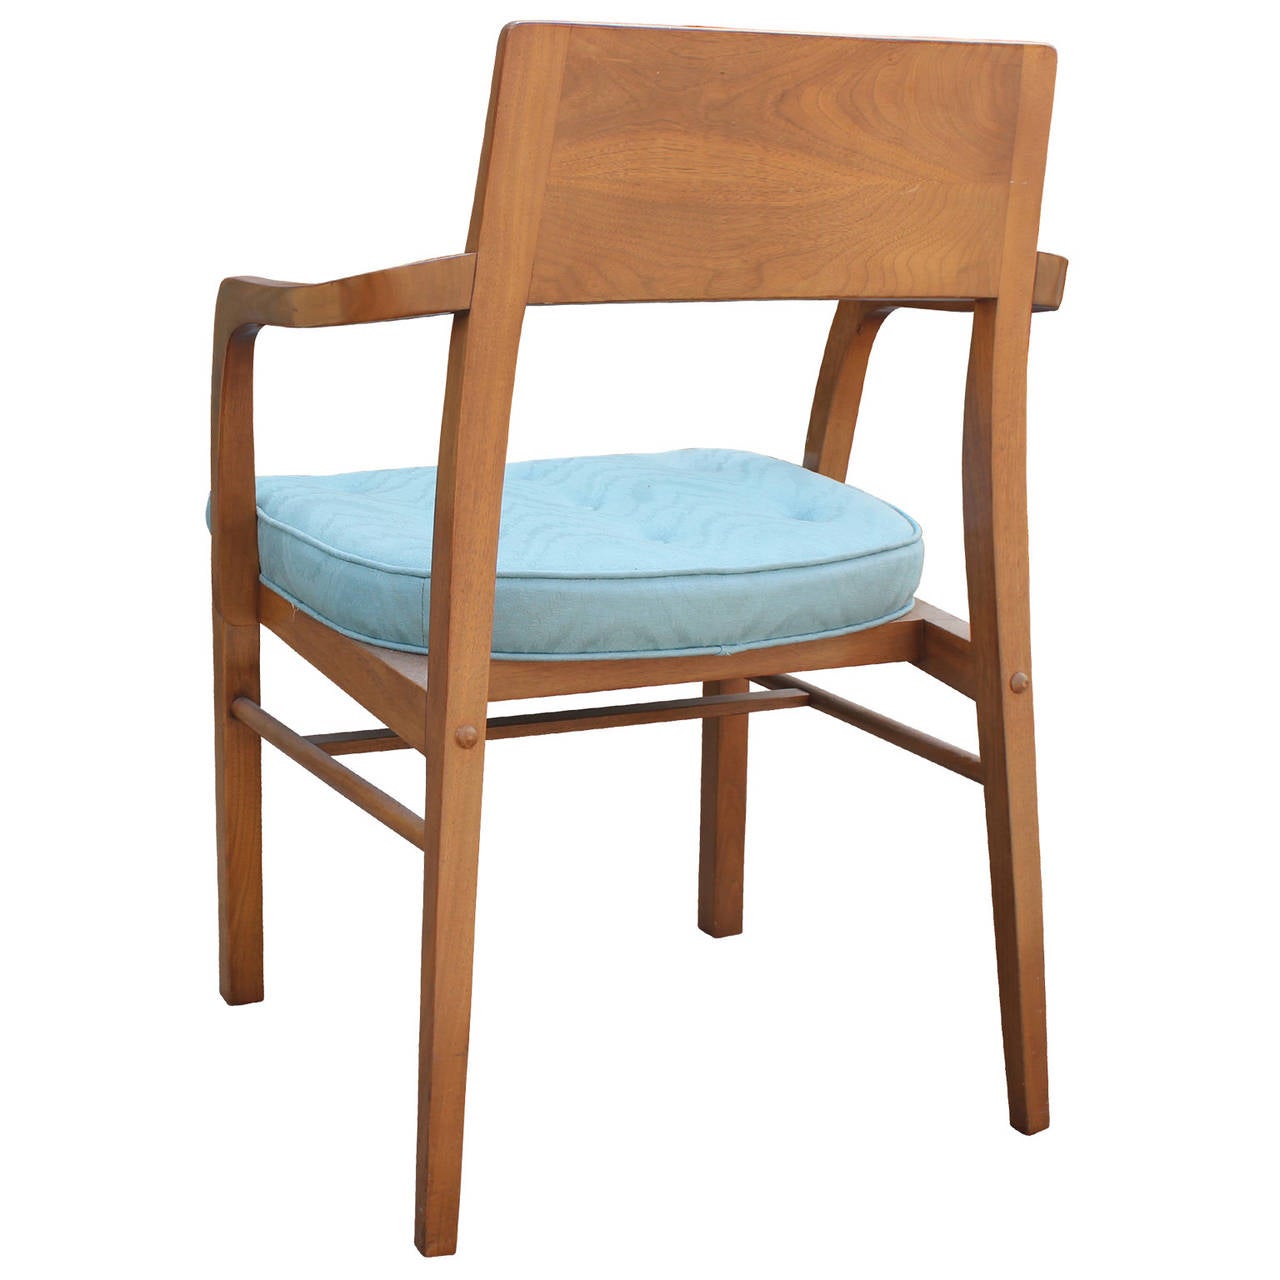 Mid-20th Century Edward Wormley for Dunbar Set of Mid-Century Modern Dining Chairs